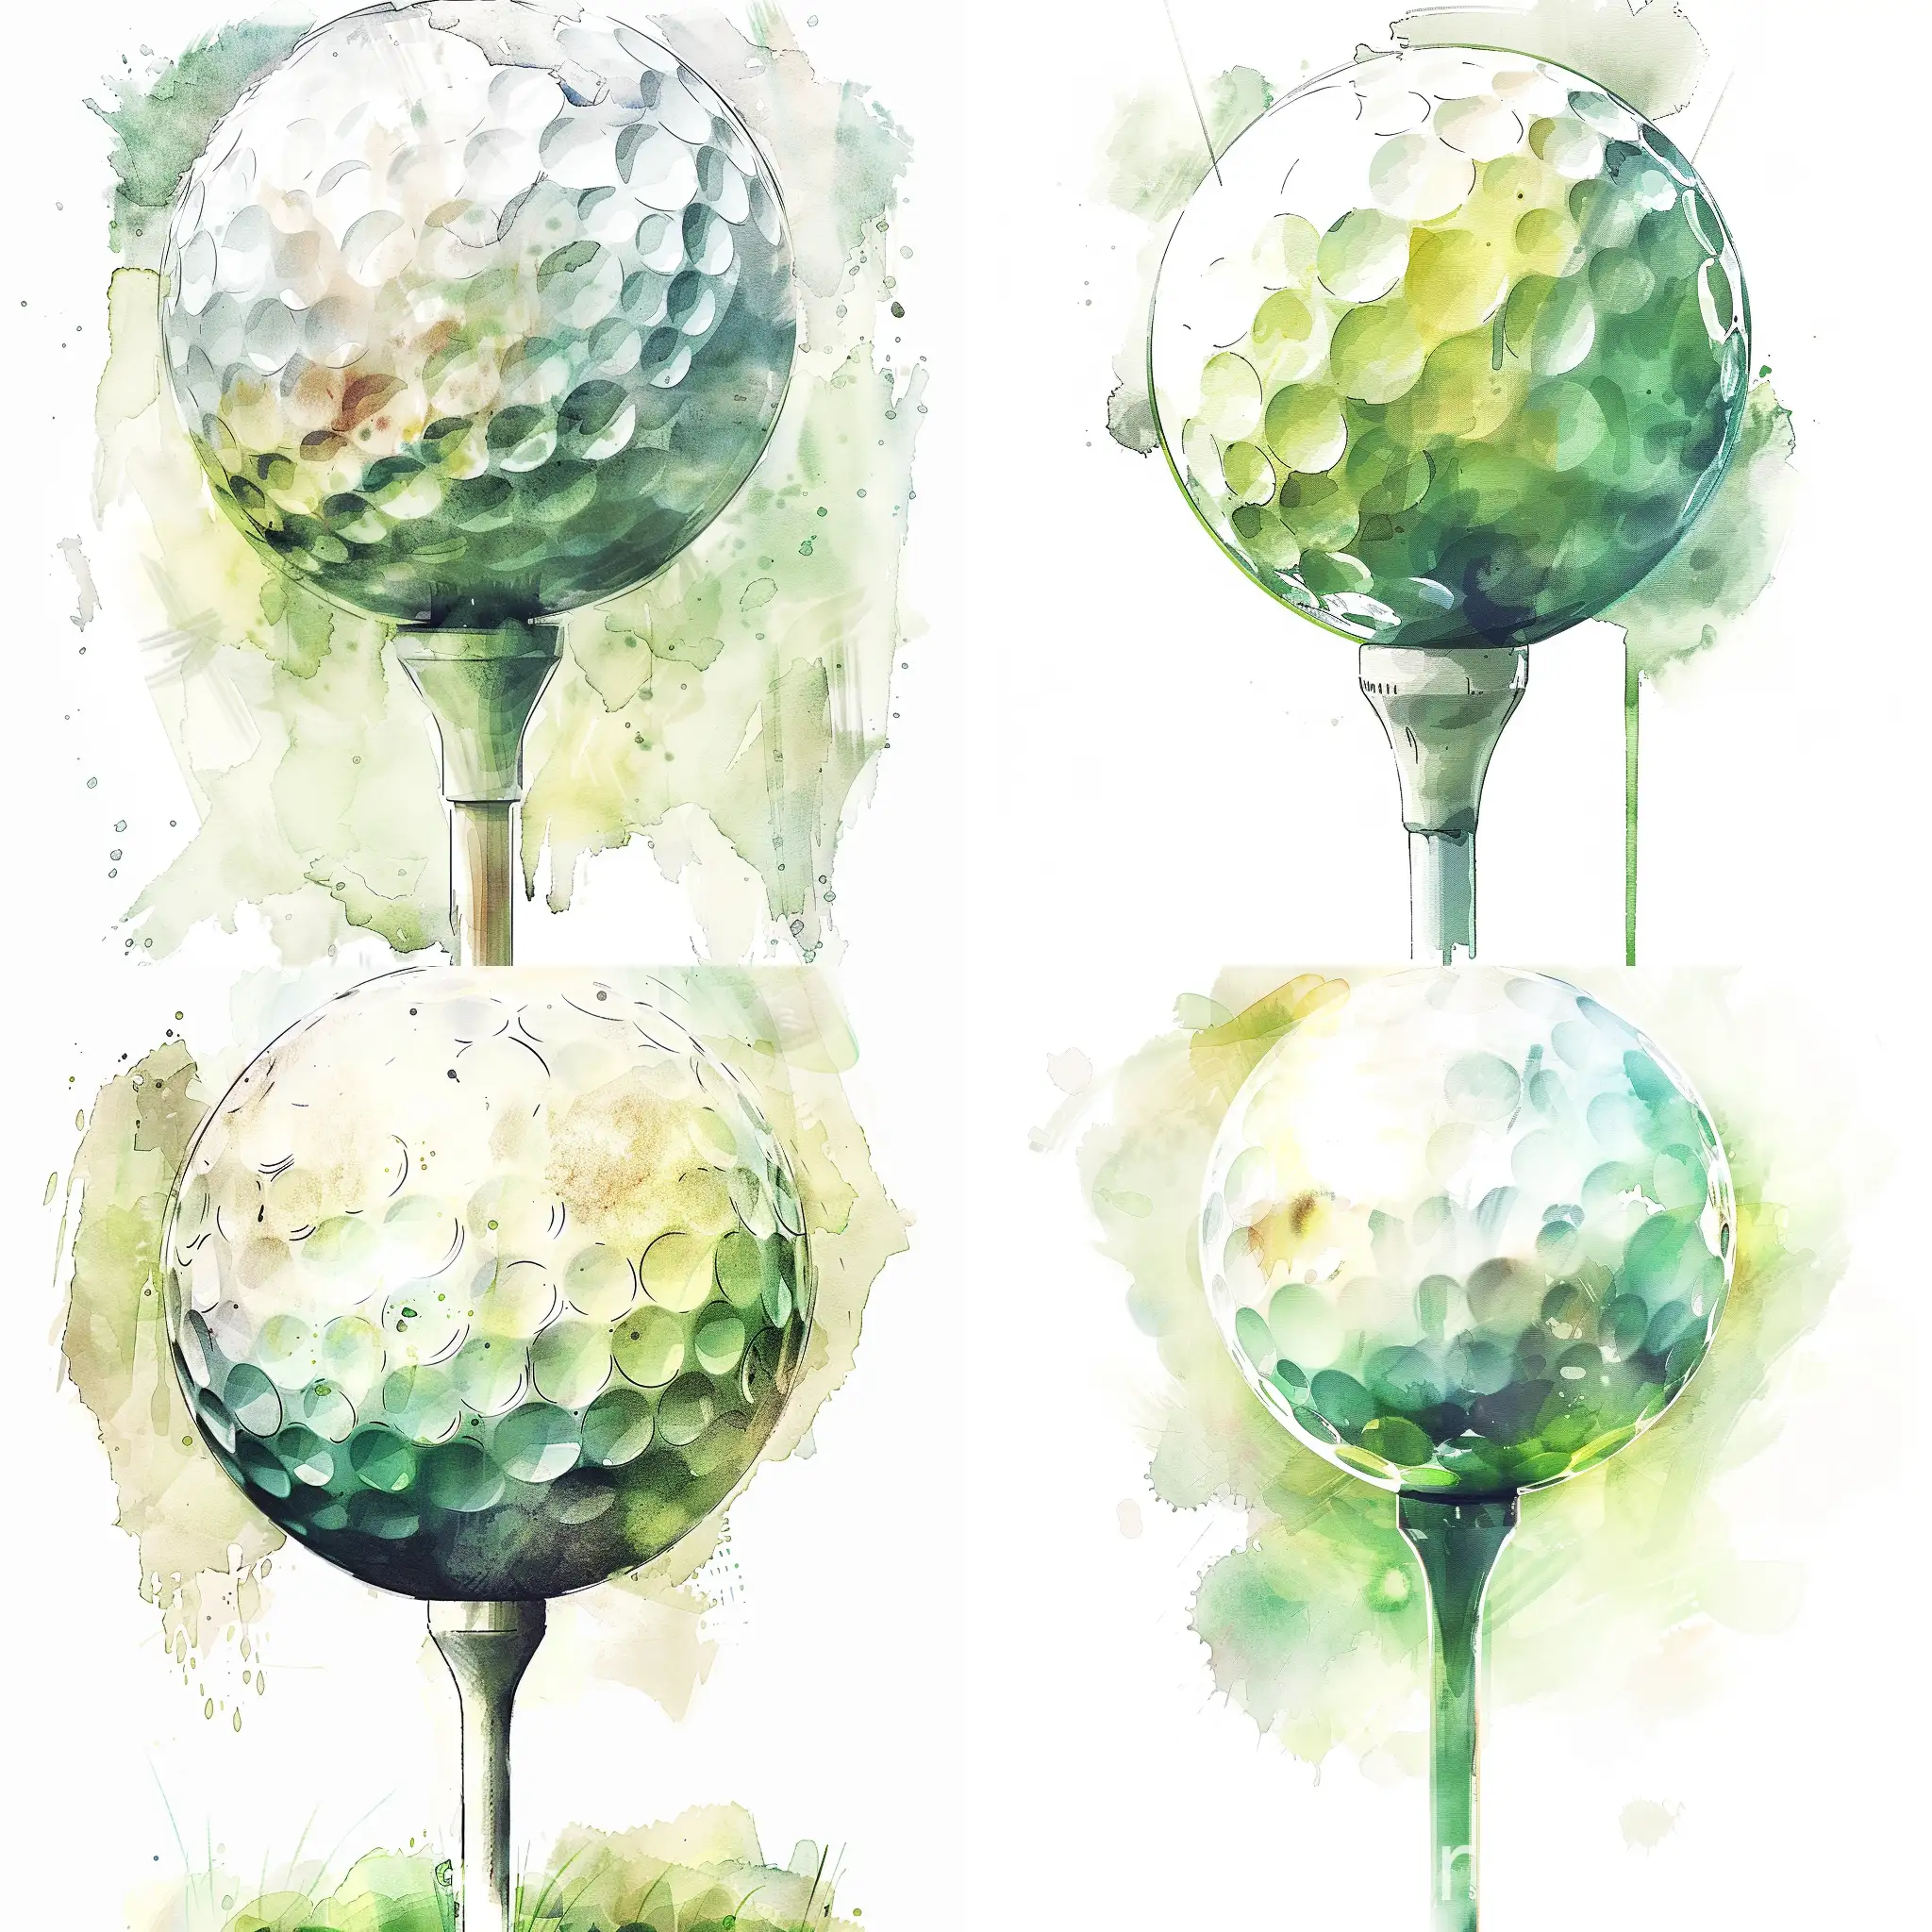 Create a digital illustration of a stylized golf ball resting on a tee, as if captured in a close-up photograph.
The golf ball should be painted with a soft watercolor effect, using a palette of gentle greens, whites and yellows.
Apply a slight transparency to the colors to enhance the watercolor aesthetic.
The golf ball and tee should be the primary focus of the image, with a plain white background to make the colors pop and emphasize the playful, stylized look of the illustration.
The overall style should be simple and artistic, evoking the feel of an original watercolor painting.